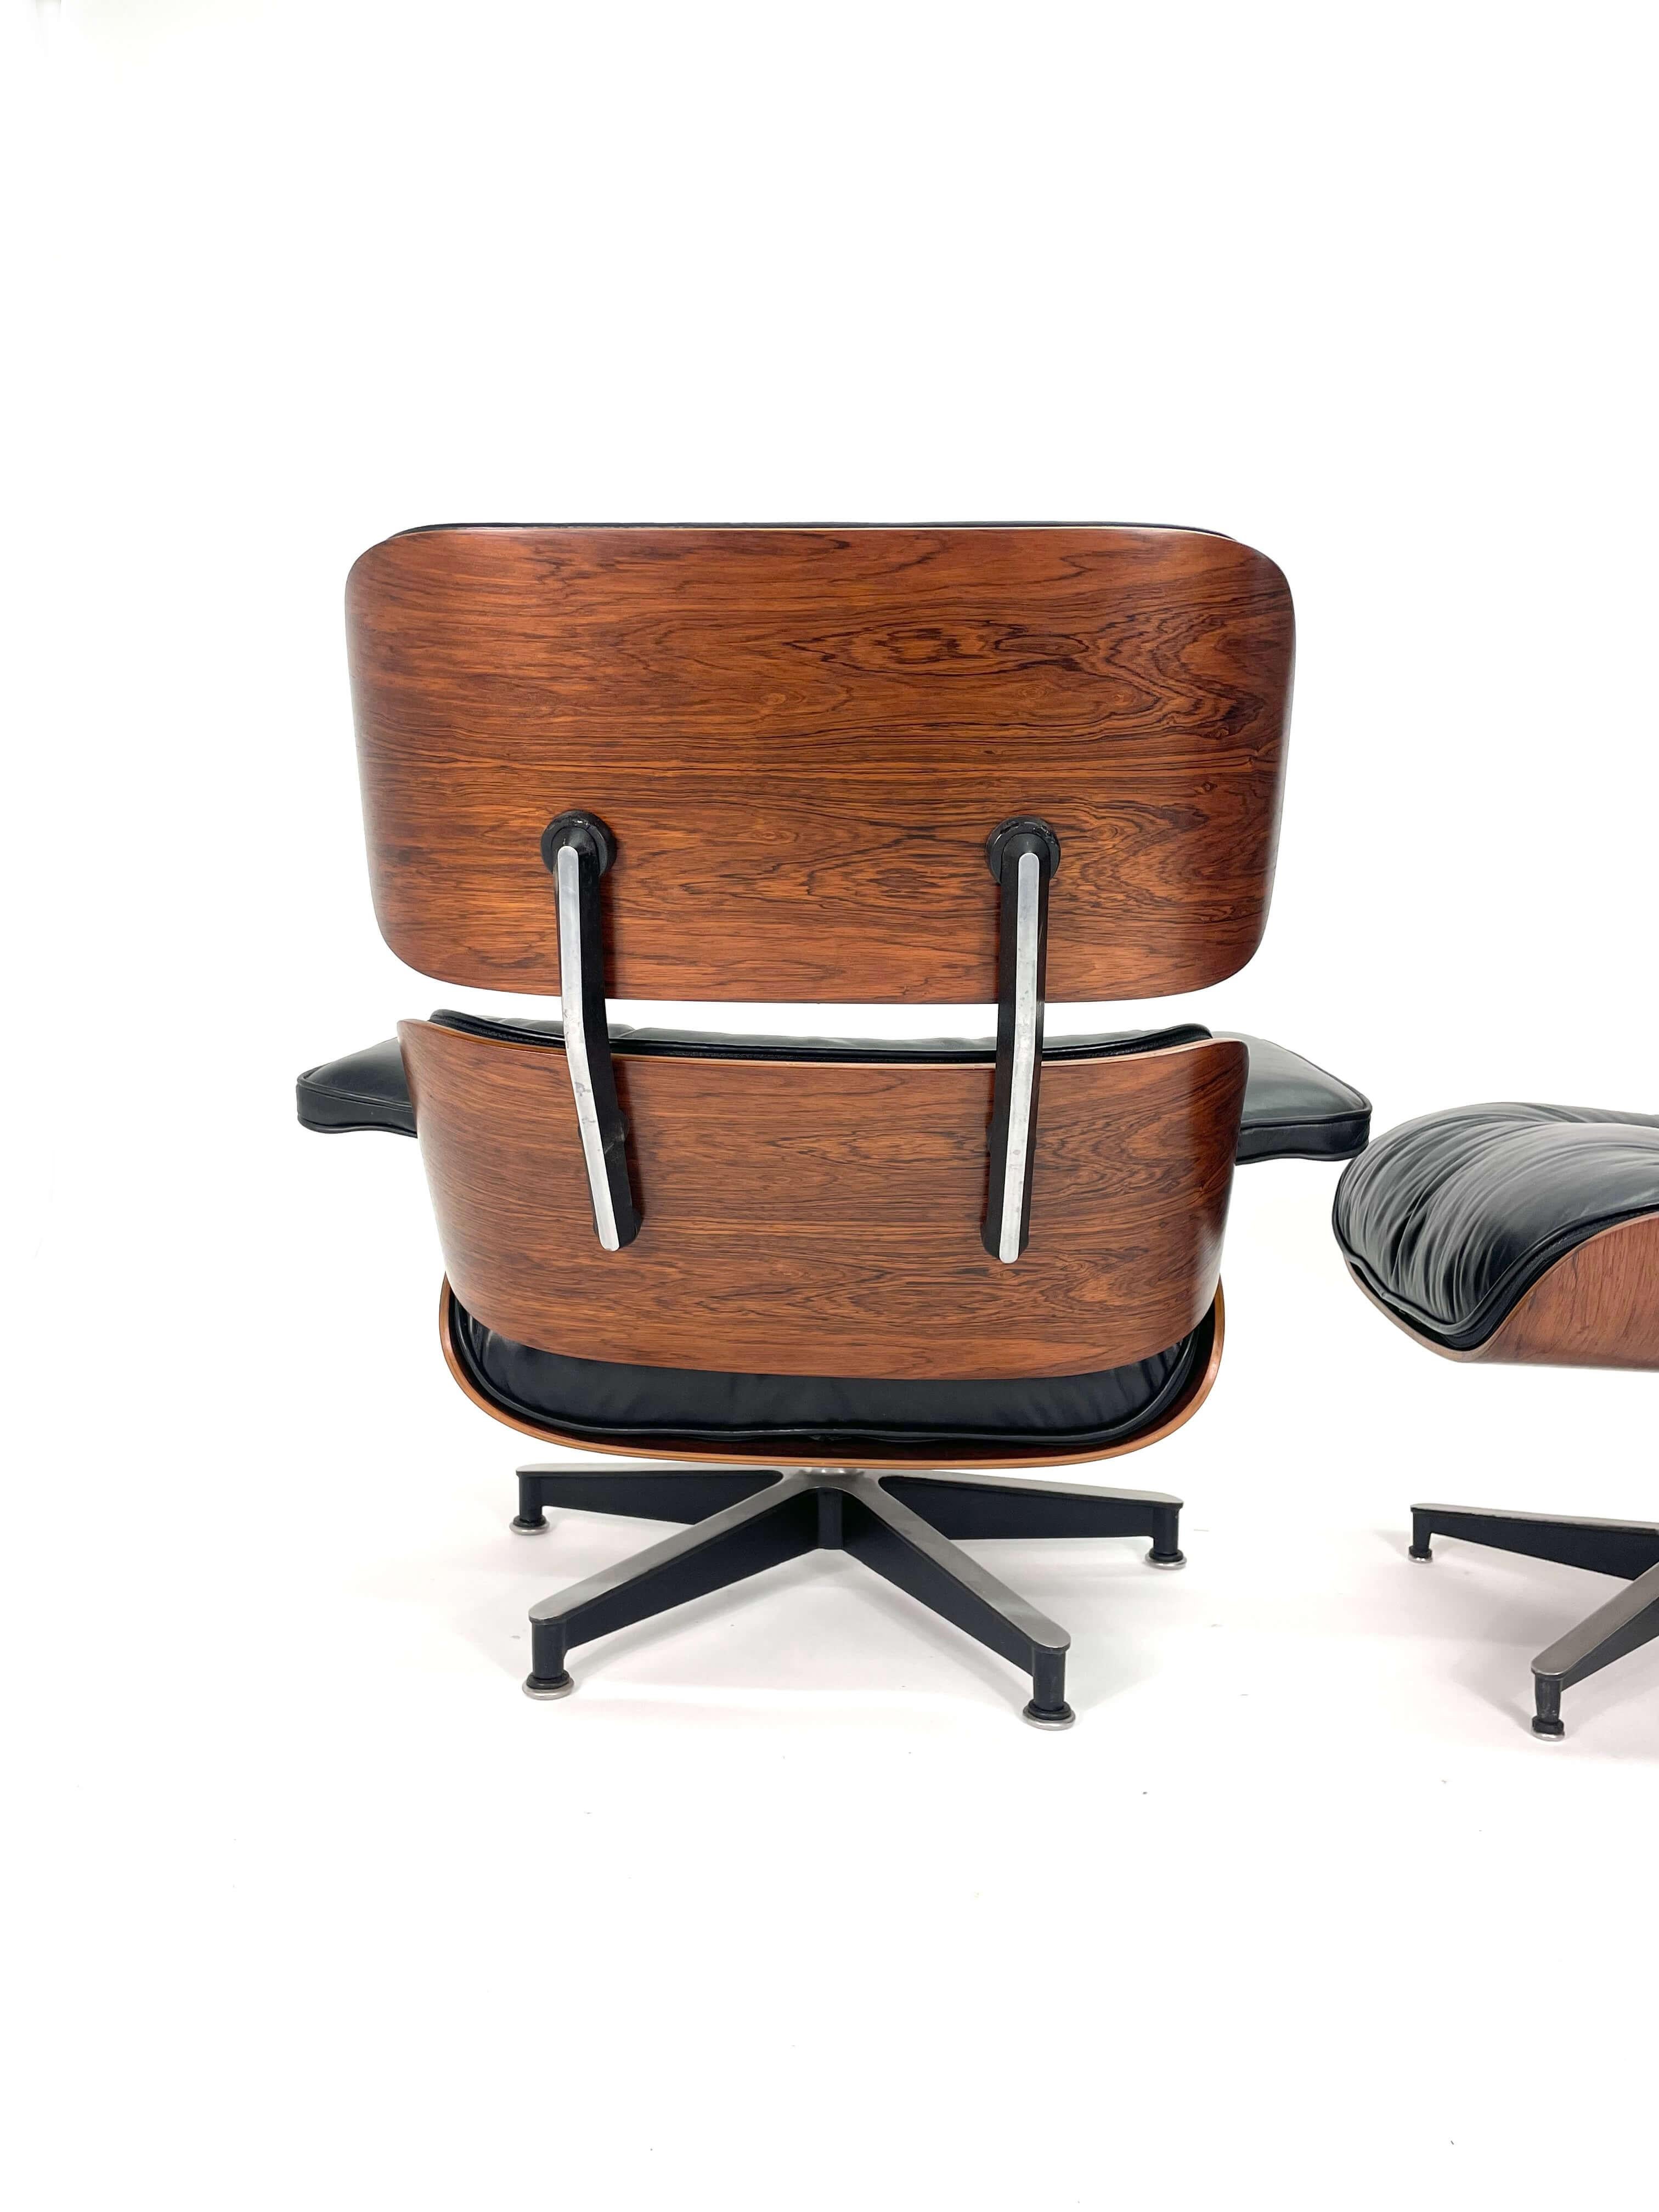 2nd Generation Eames Lounge Chair and Ottoman in Rosewood, Circa 1960's 6